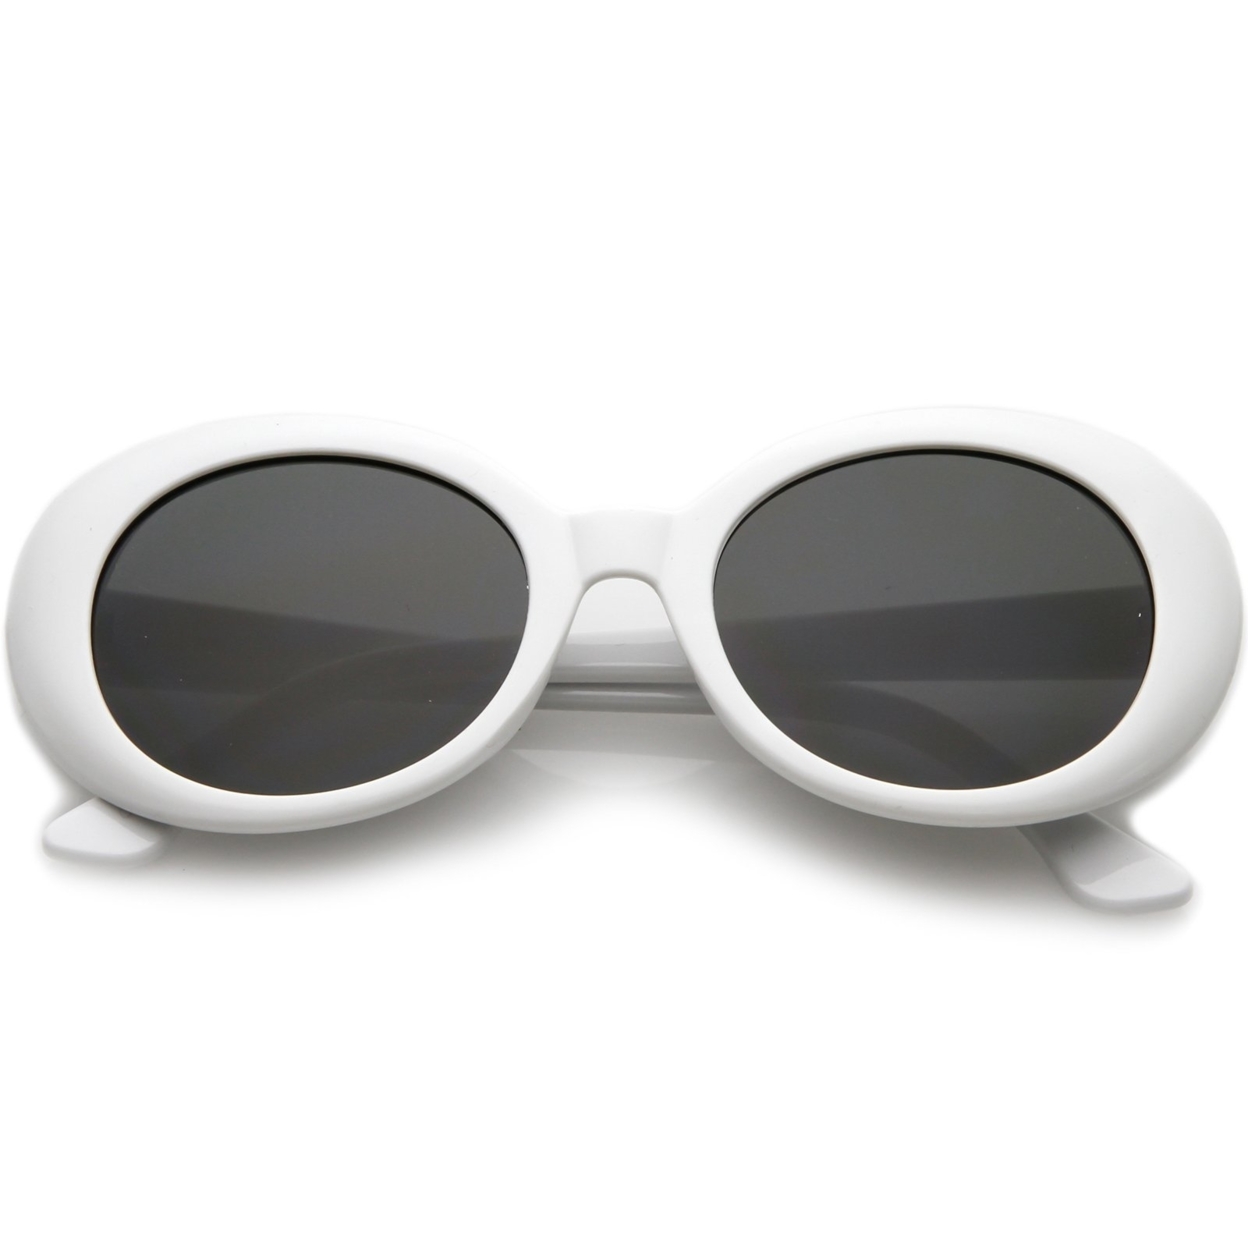 Retro Oval Sunglasses Tapered Arms Neutral Colored Round Lens 53mm - White / Smoke